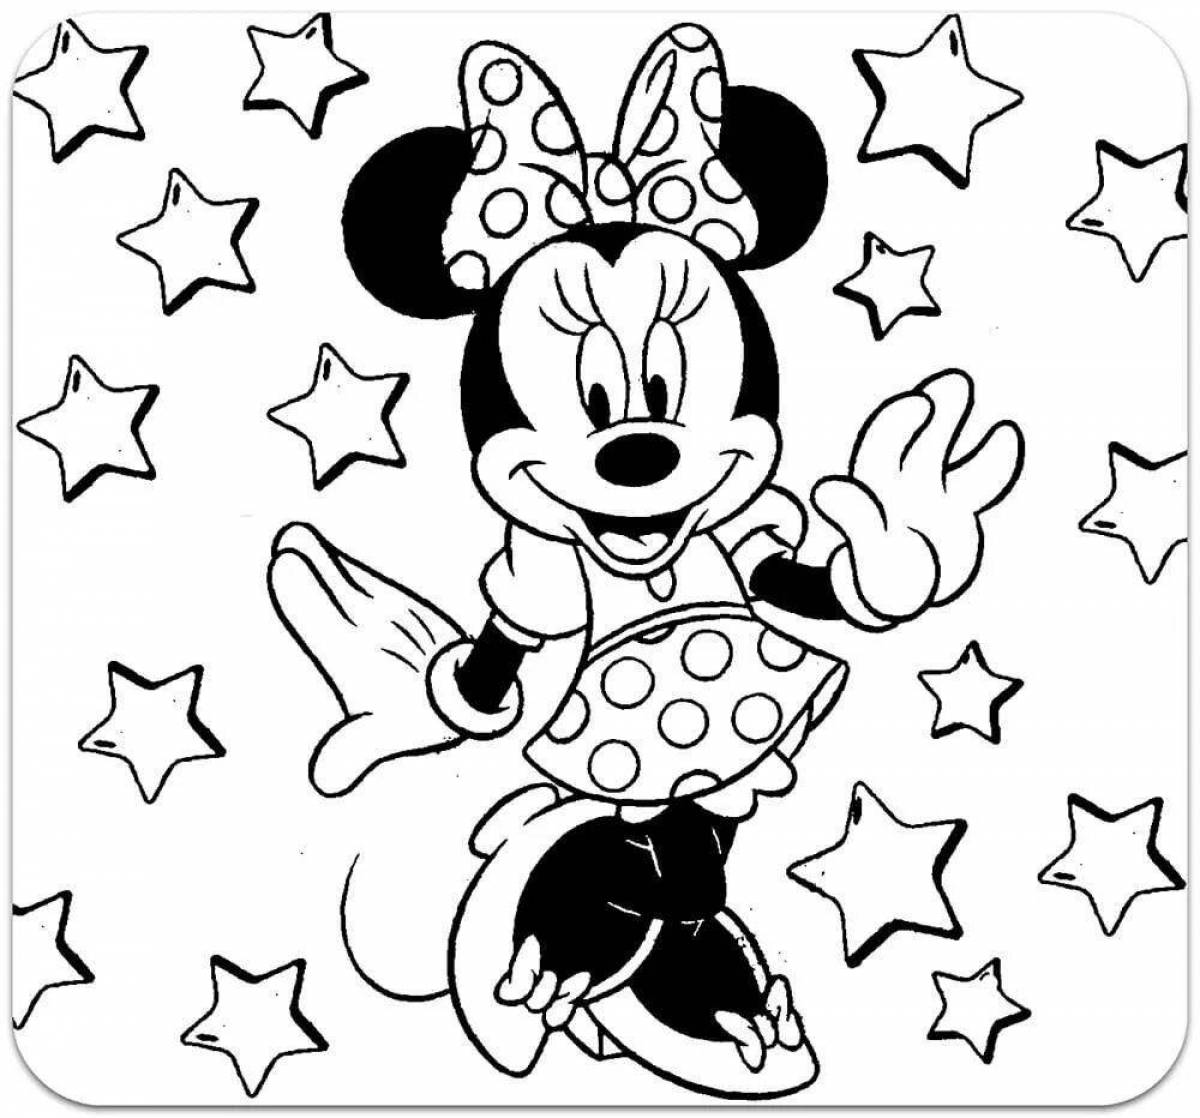 Intriguing Mickey Mouse coloring book